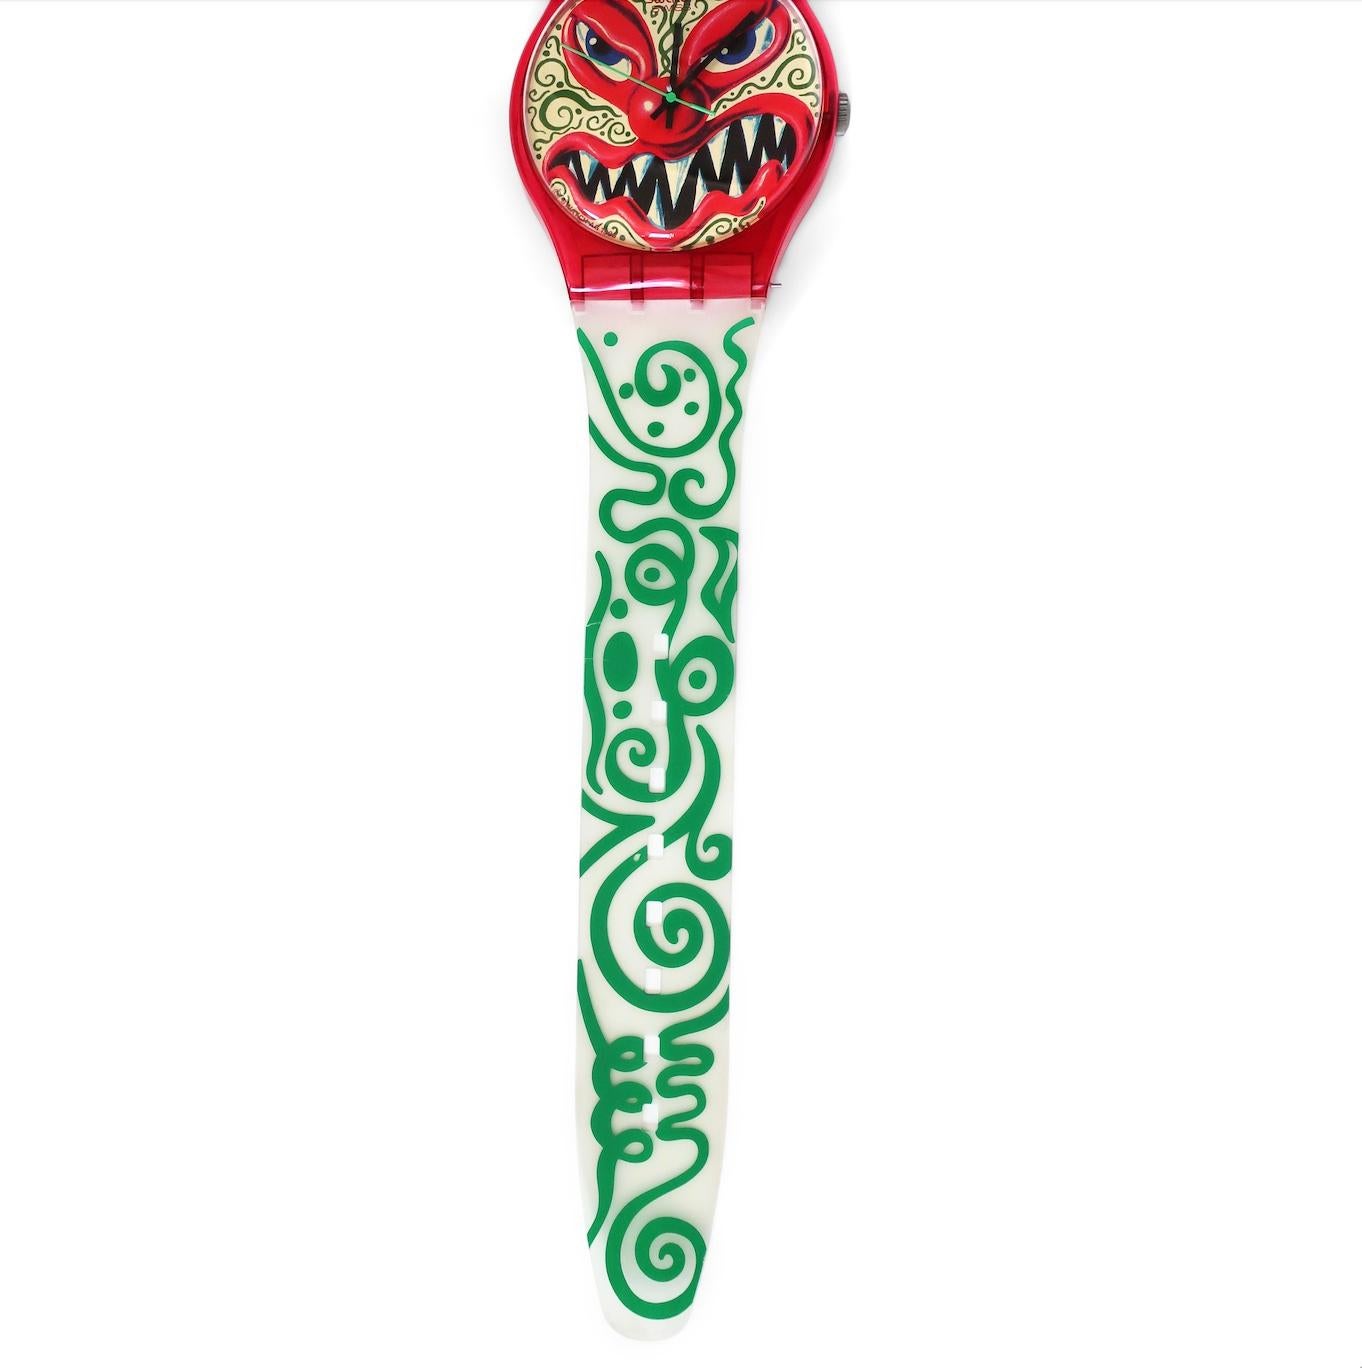 Post-Modern 1993 “Monster Time” Wristwatch Wall Clock by Kenny Scharf for Swatch